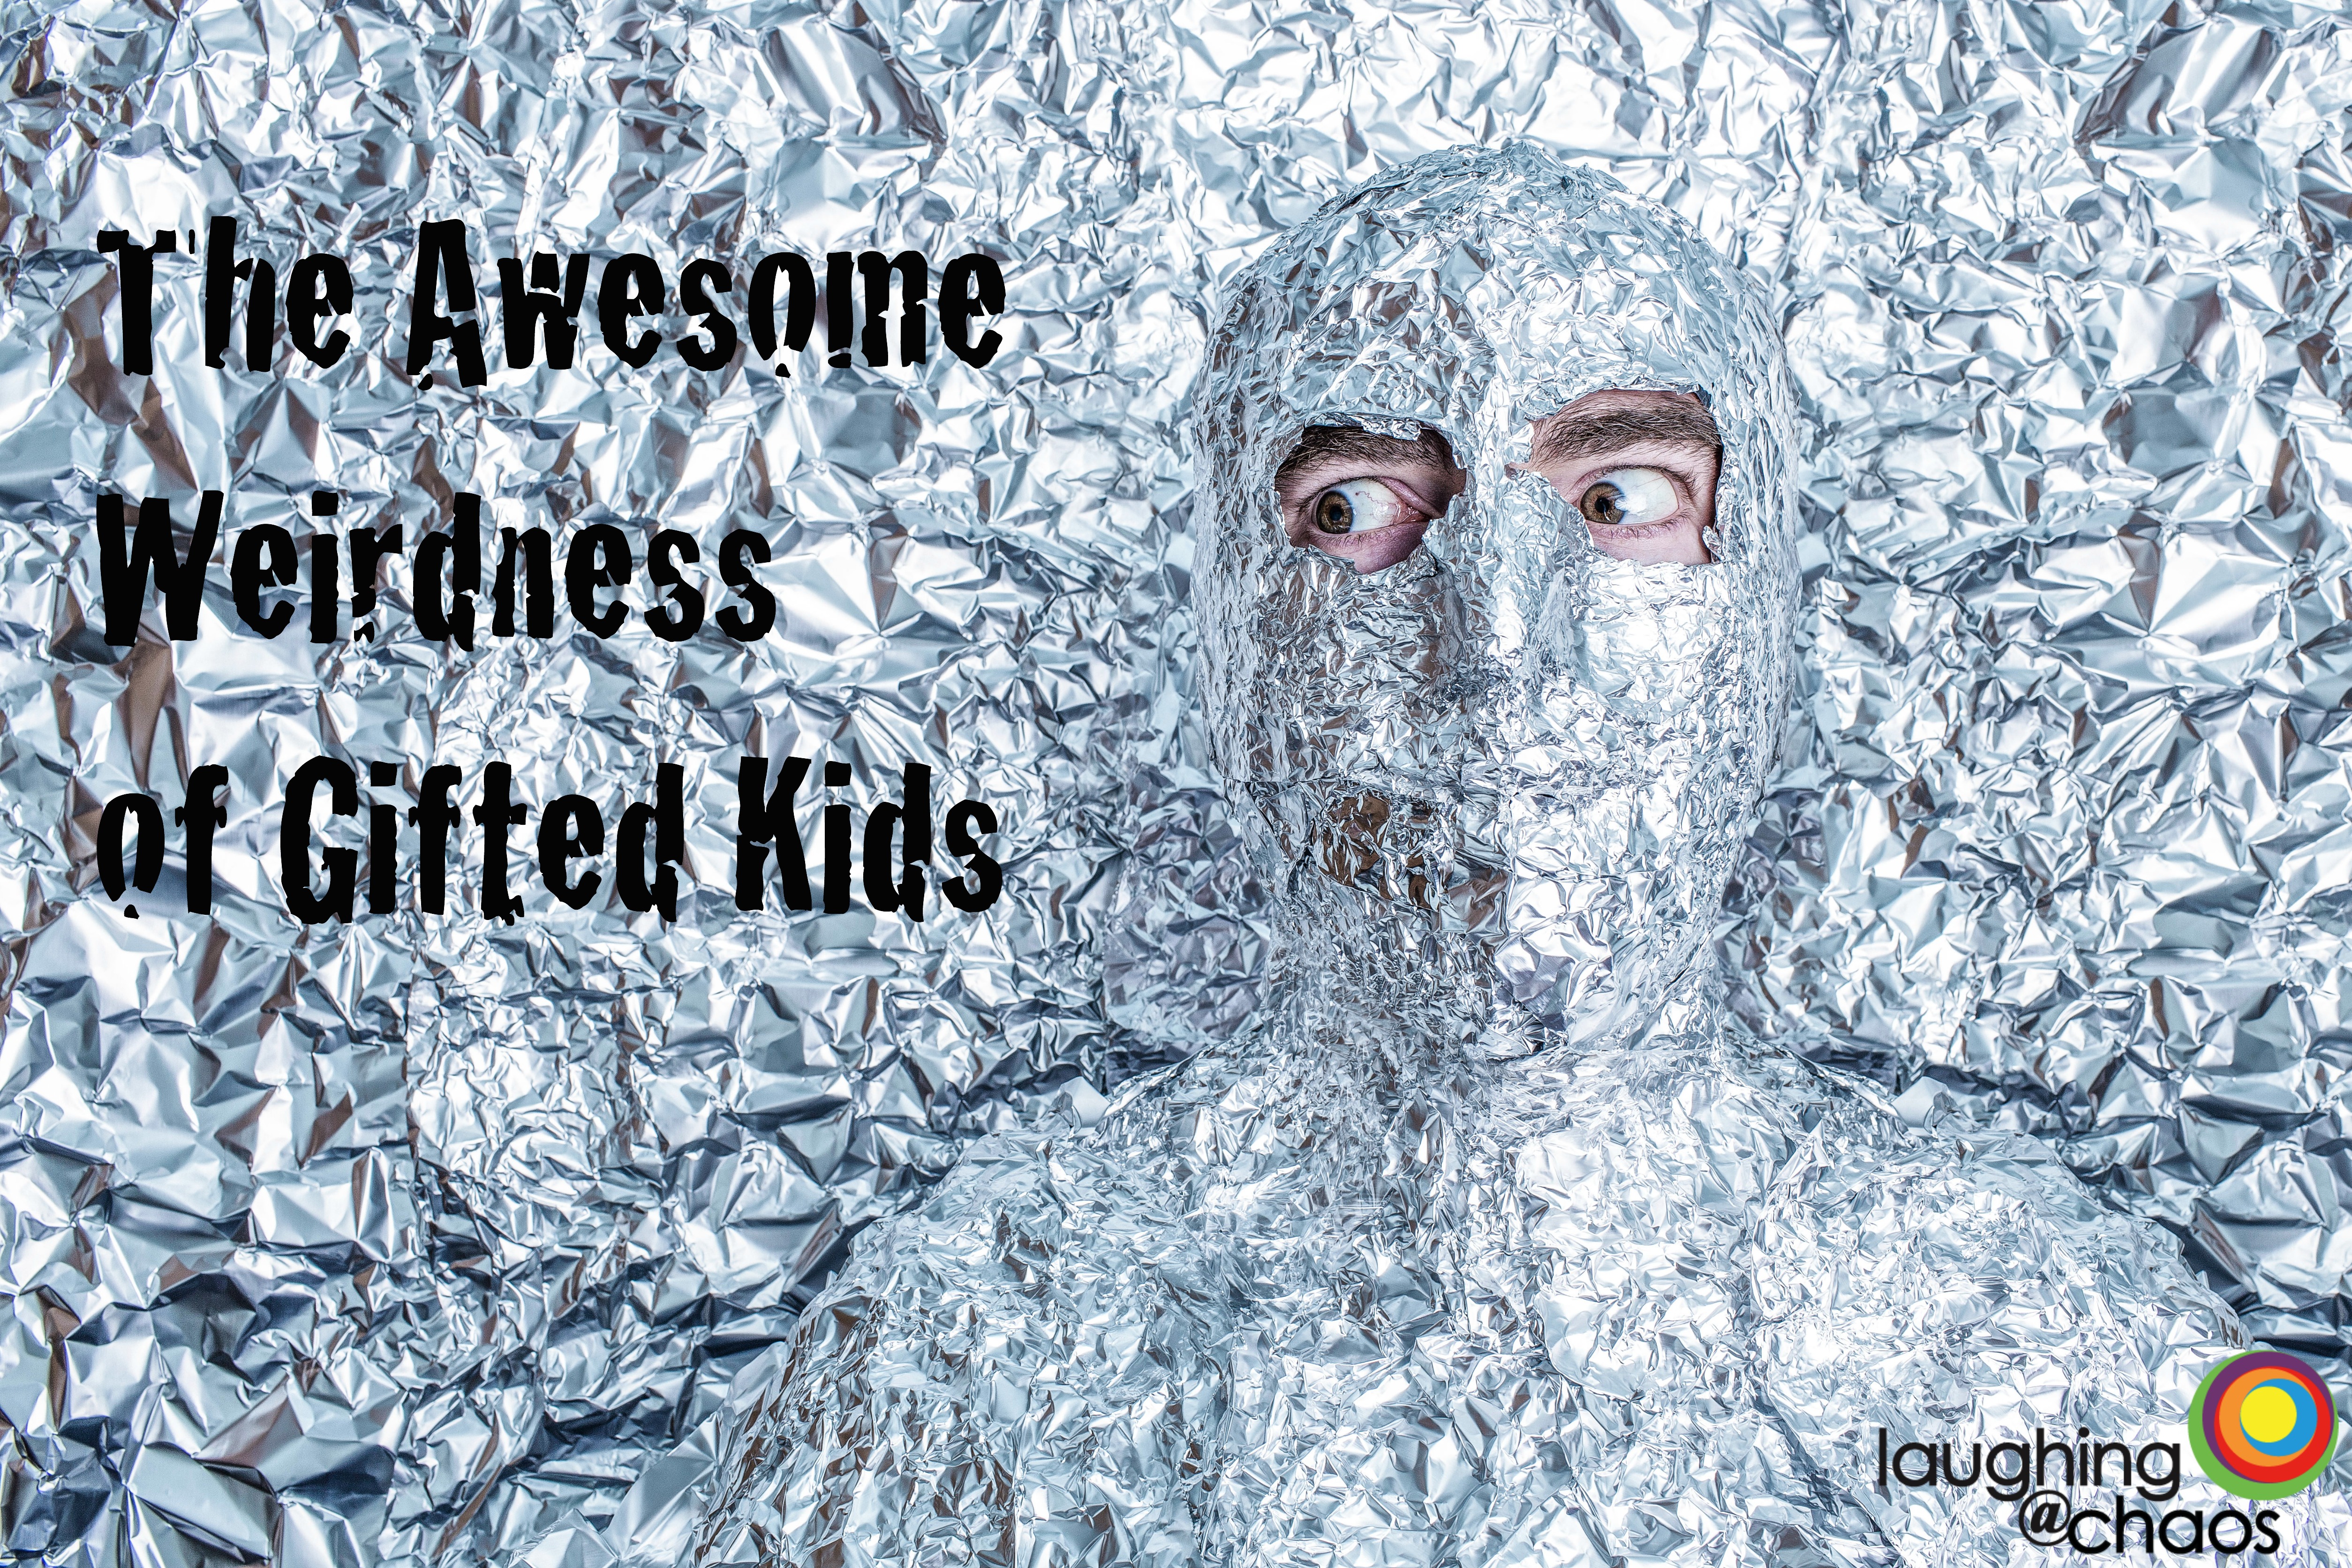 The awesome weirdness of gifted kids